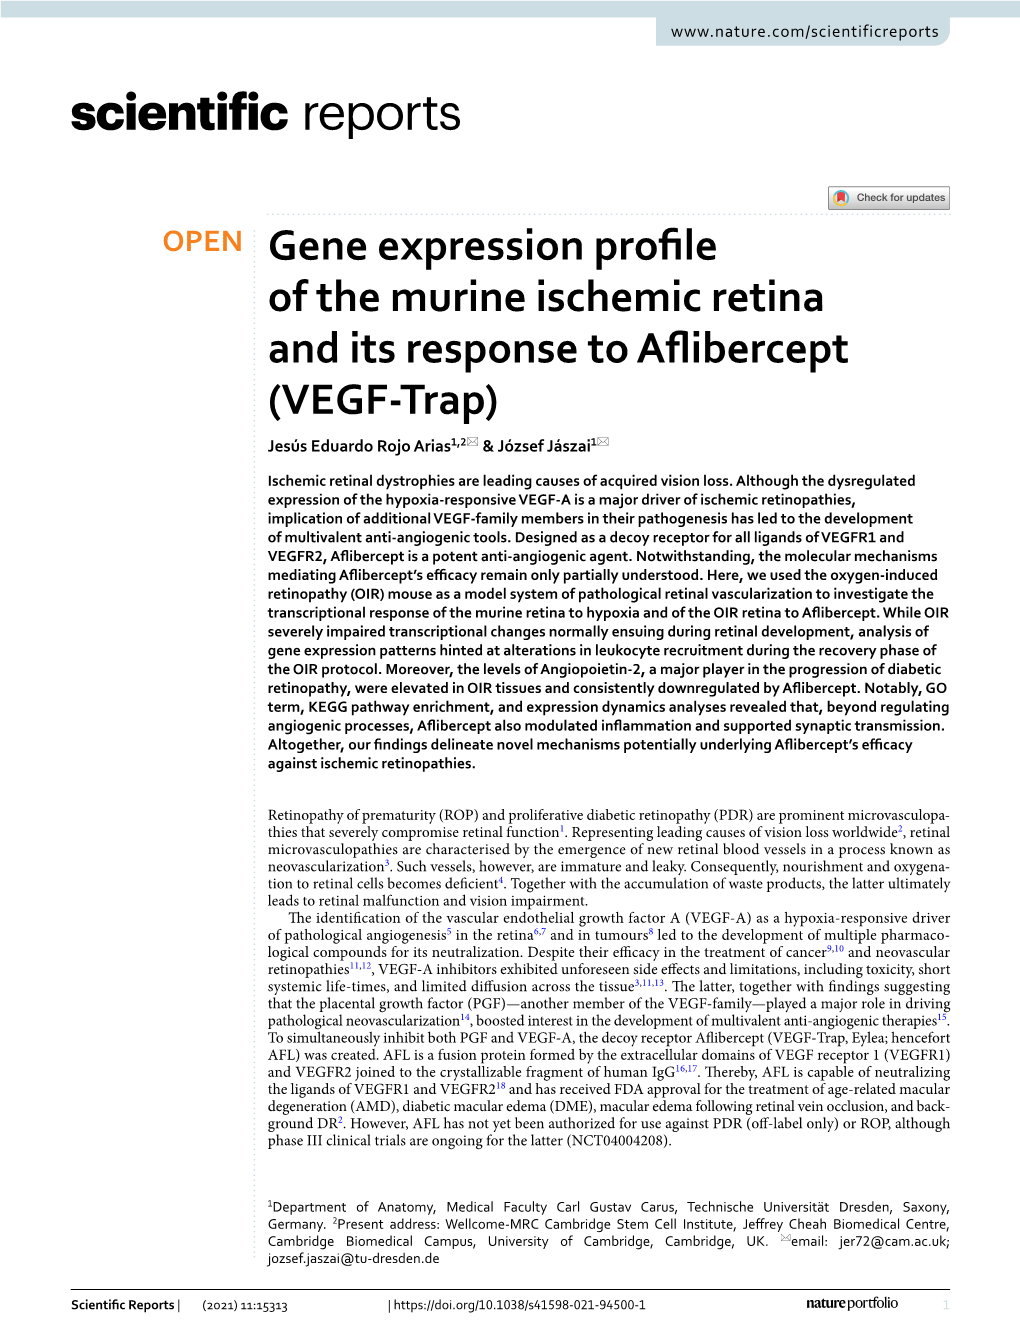 Gene Expression Profile of the Murine Ischemic Retina and Its Response To